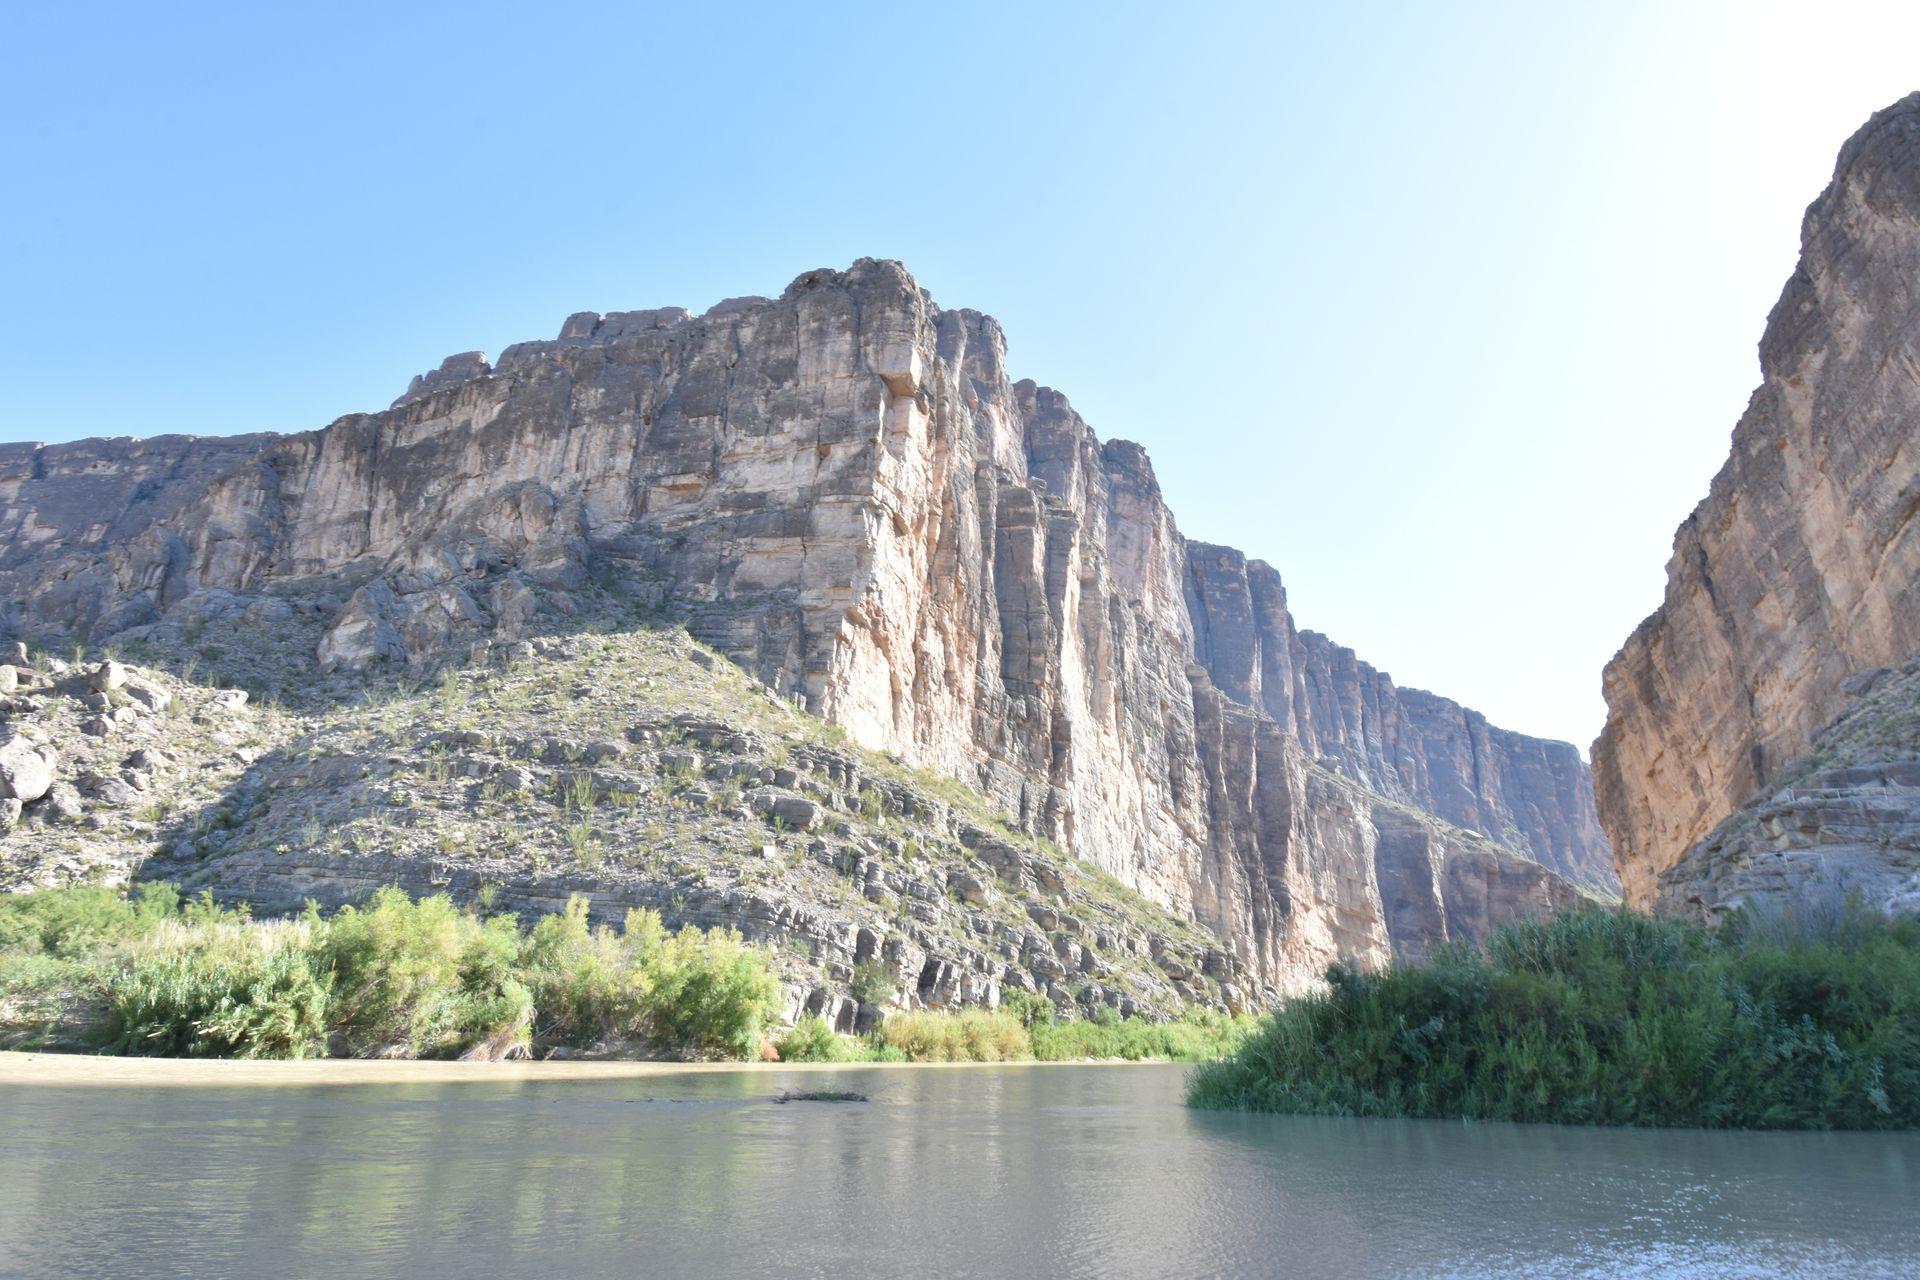 Santa Elena Canyon from across the river in Big Bend National Park